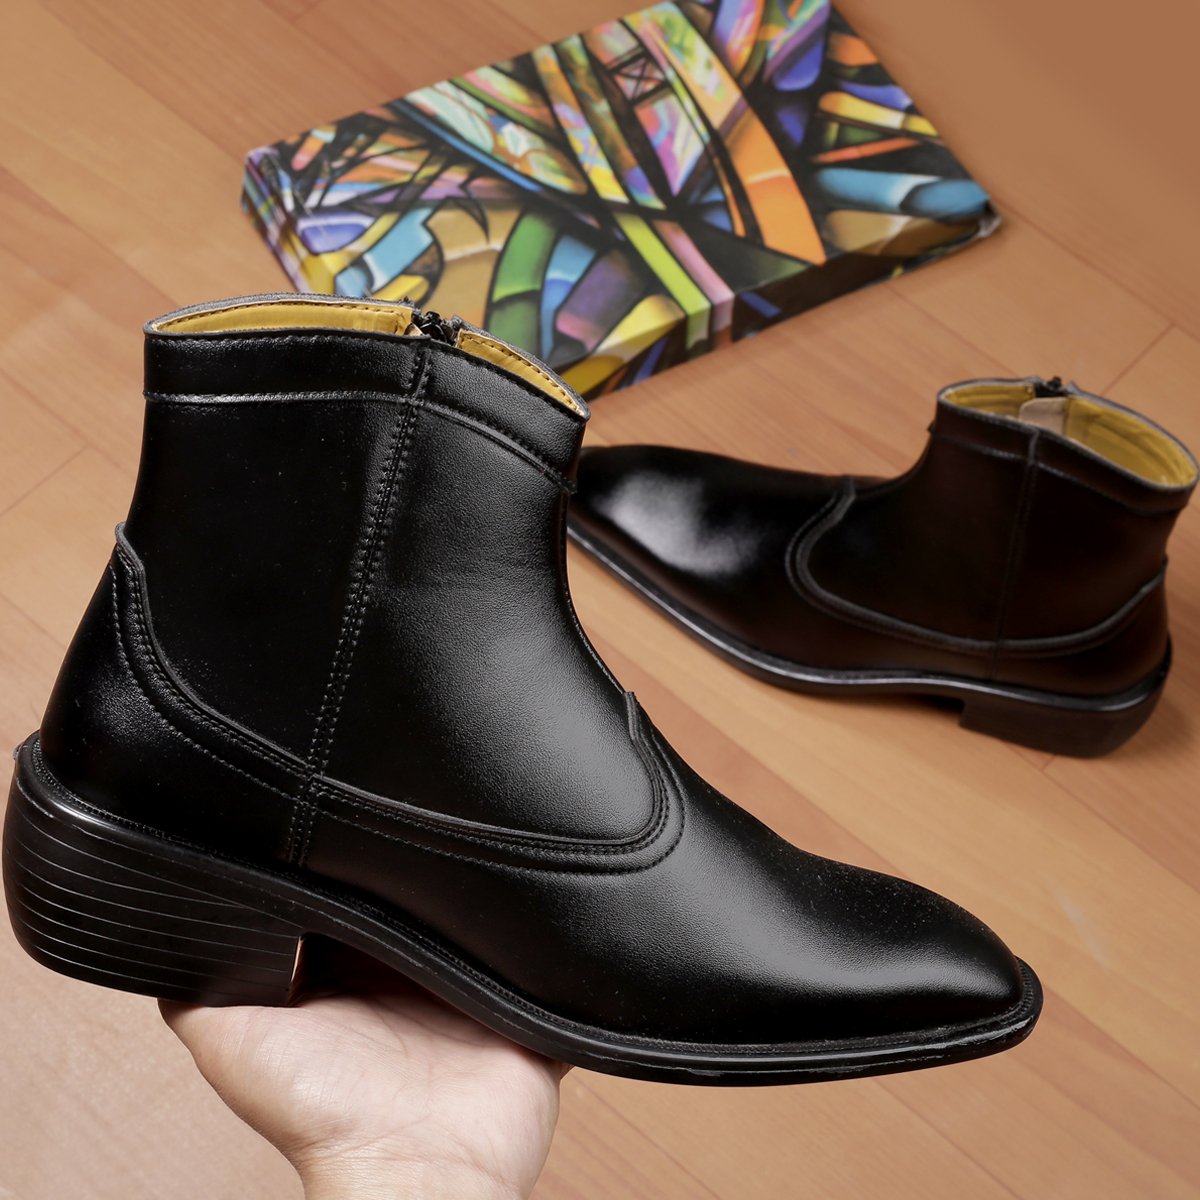 Jack Marc Black Height Increasing Boots For Men for Office & Daily Wear